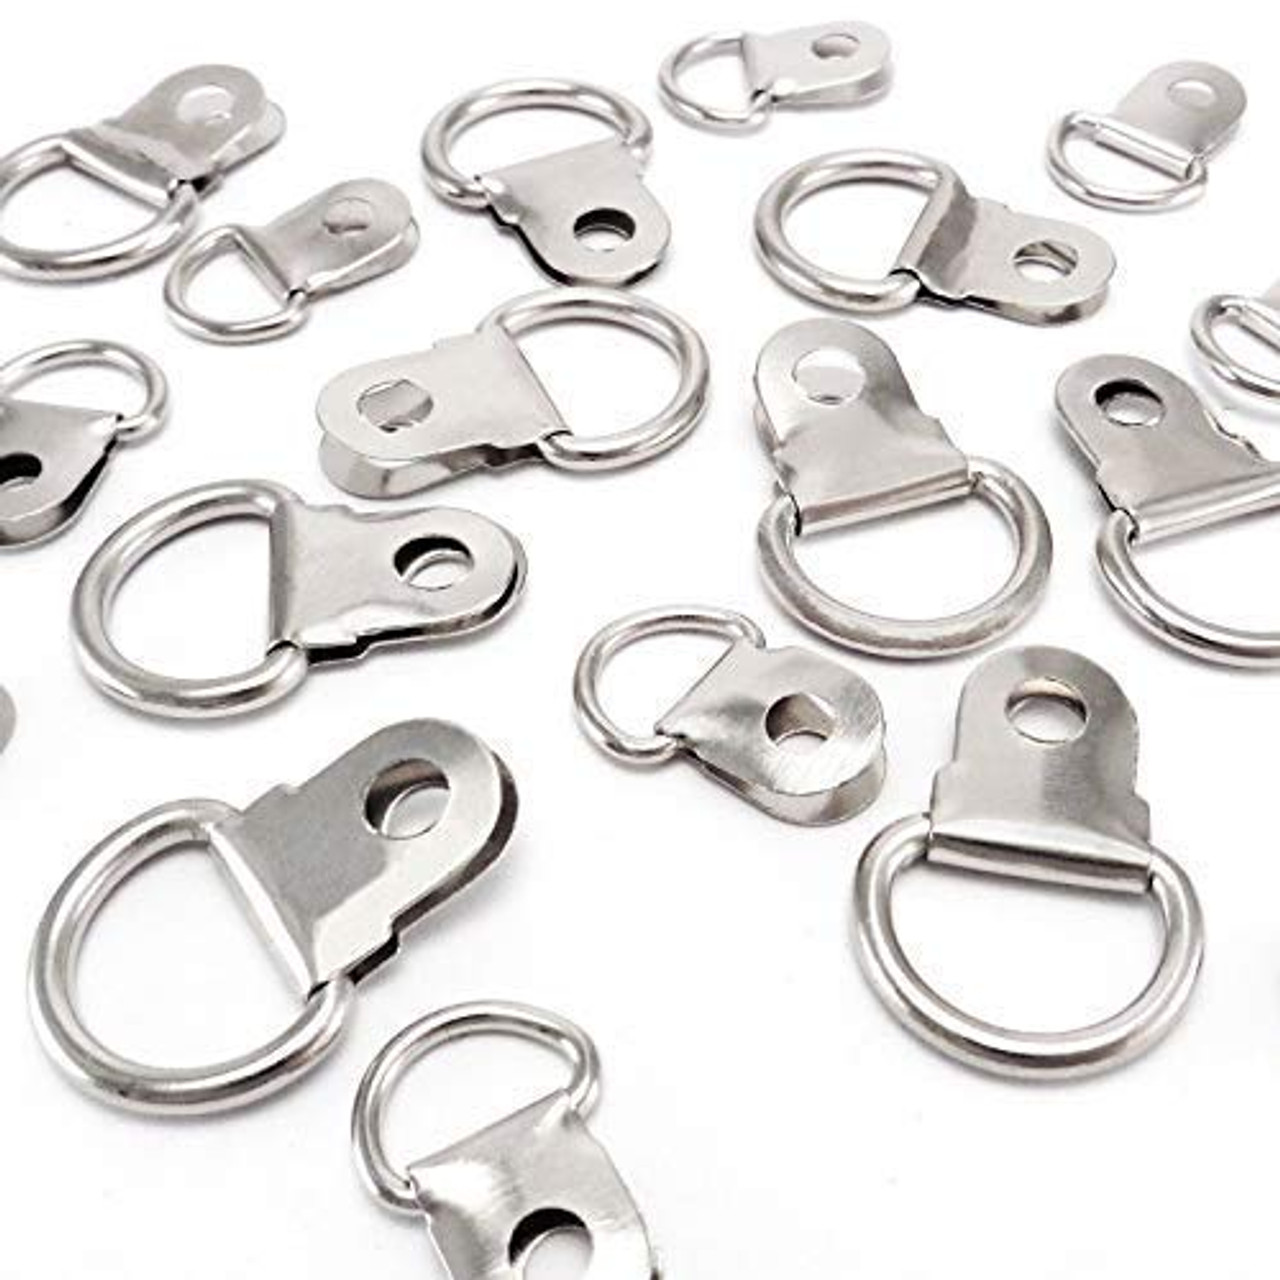 10mm Metal Single Hole D-Ring Hooks - (Pack of 2)